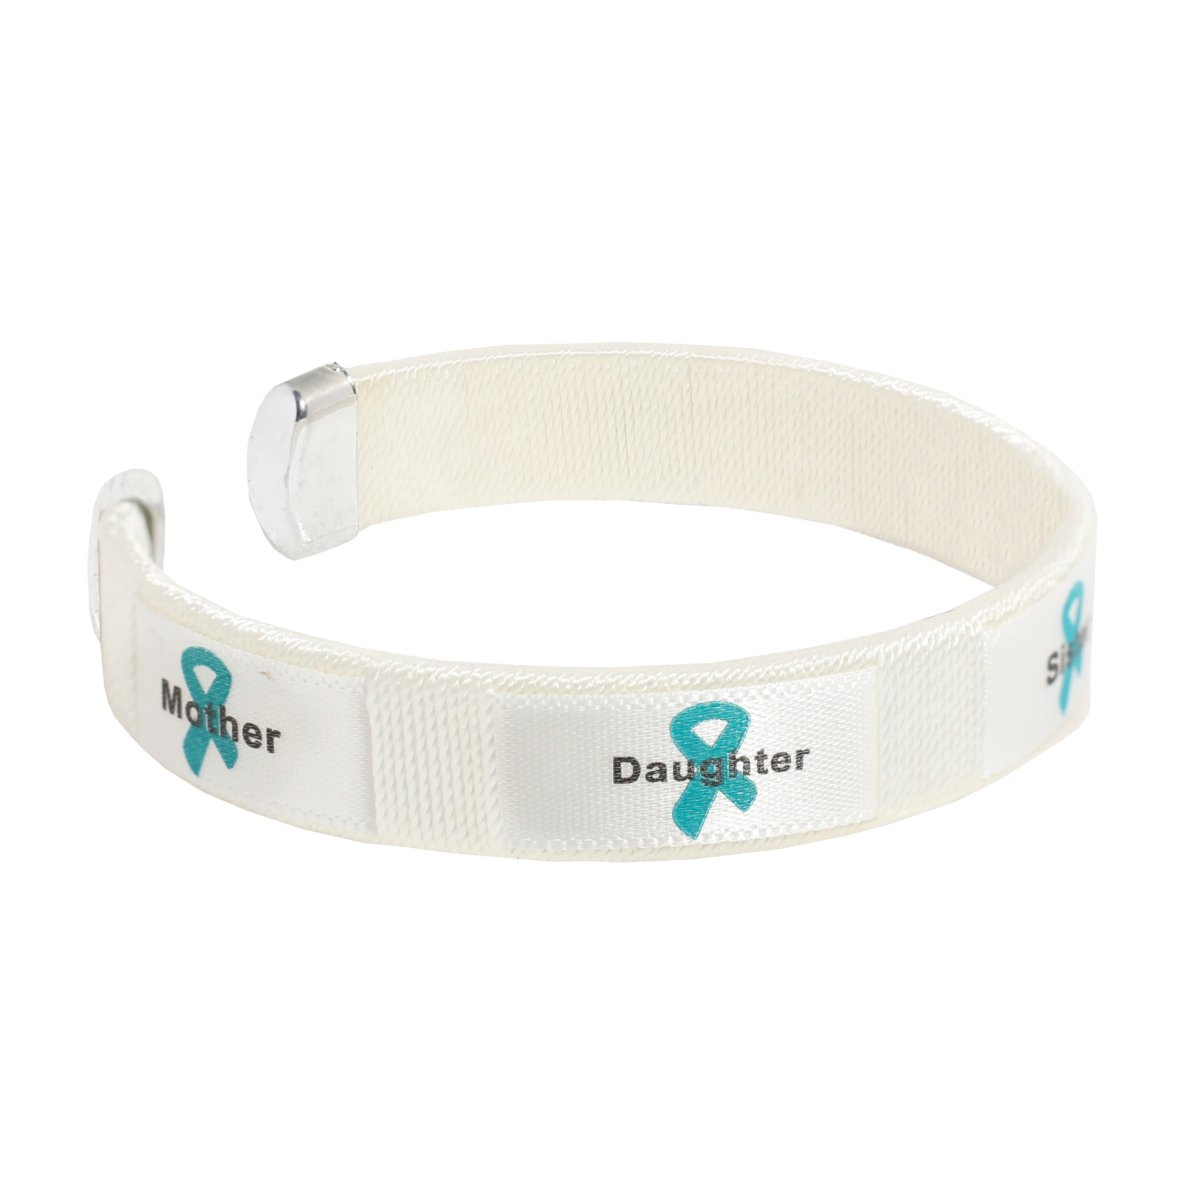 Mother Daughter Teal Ribbon Bangle Bracelets - Fundraising For A Cause